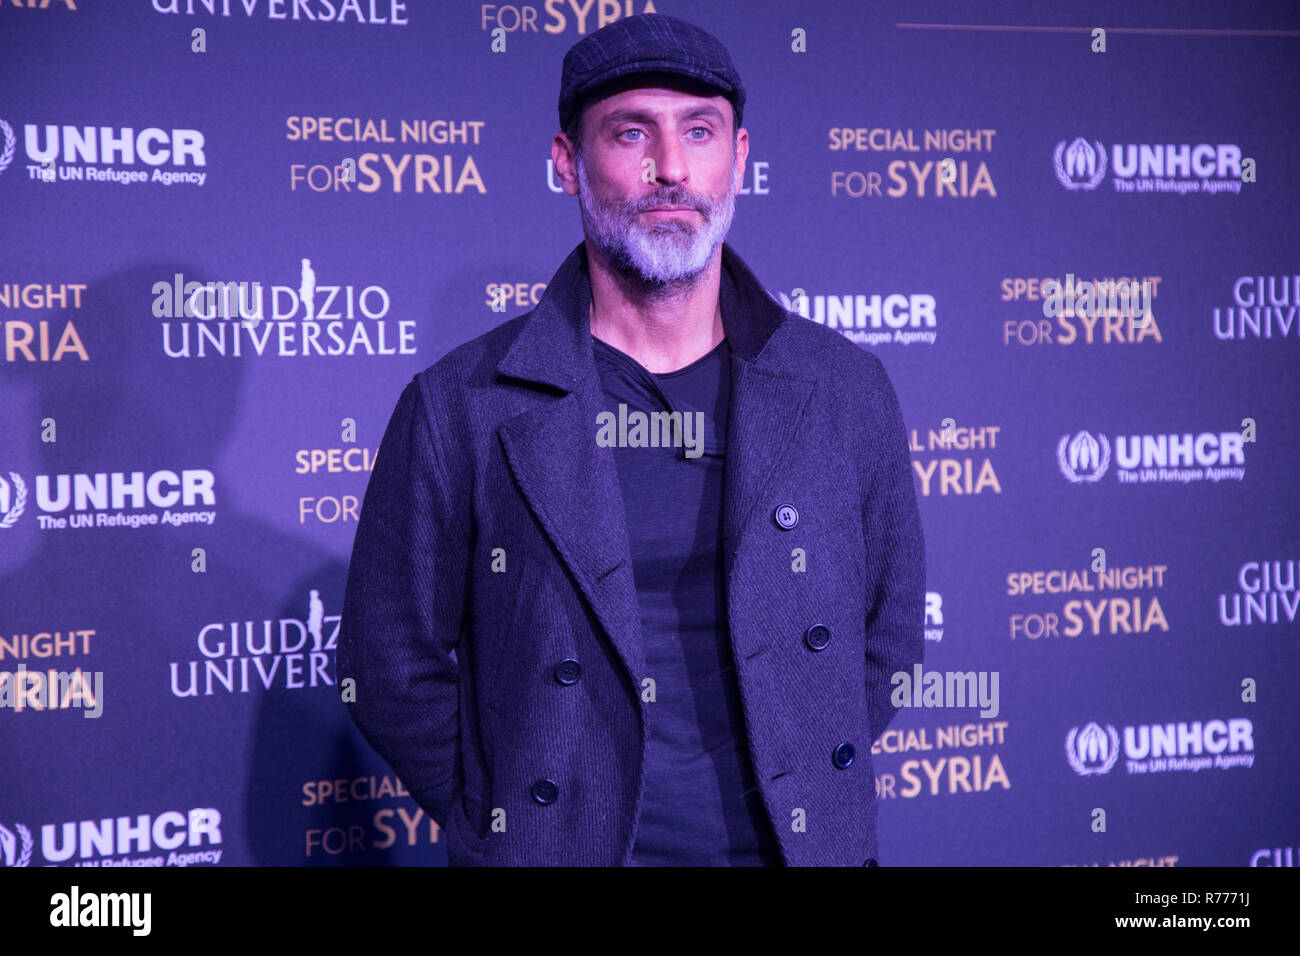 Rome, Italy. 06th Dec, 2018. Raz Degan Blue carpet and photocall of the special evening for Syria with the show 'Last Judgment' and UNHCR at the Auditorium Conciliazione in Rome. Credit: Matteo Nardone/Pacific Press/Alamy Live News Stock Photo